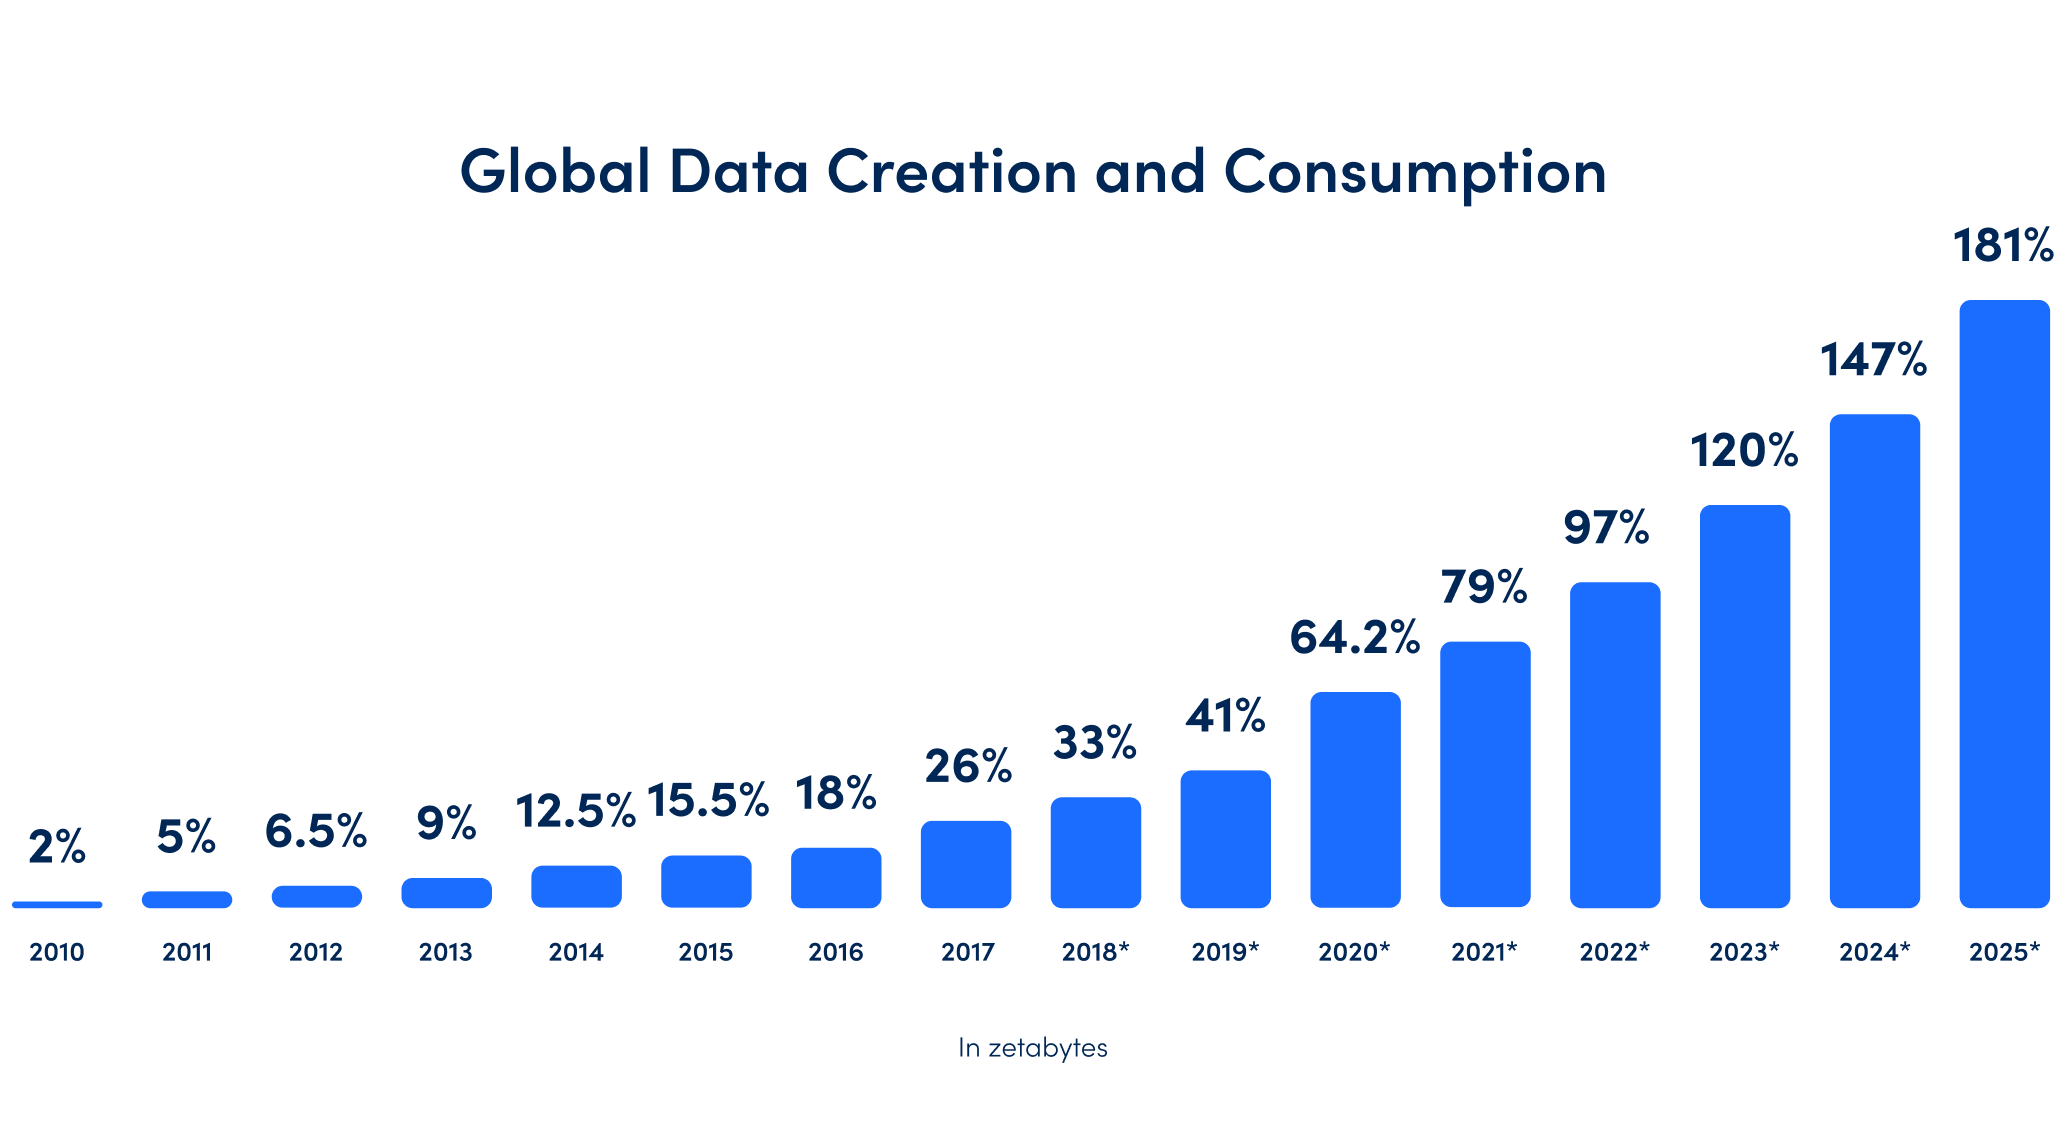 Chart of global data creation and consumption in zetabytes